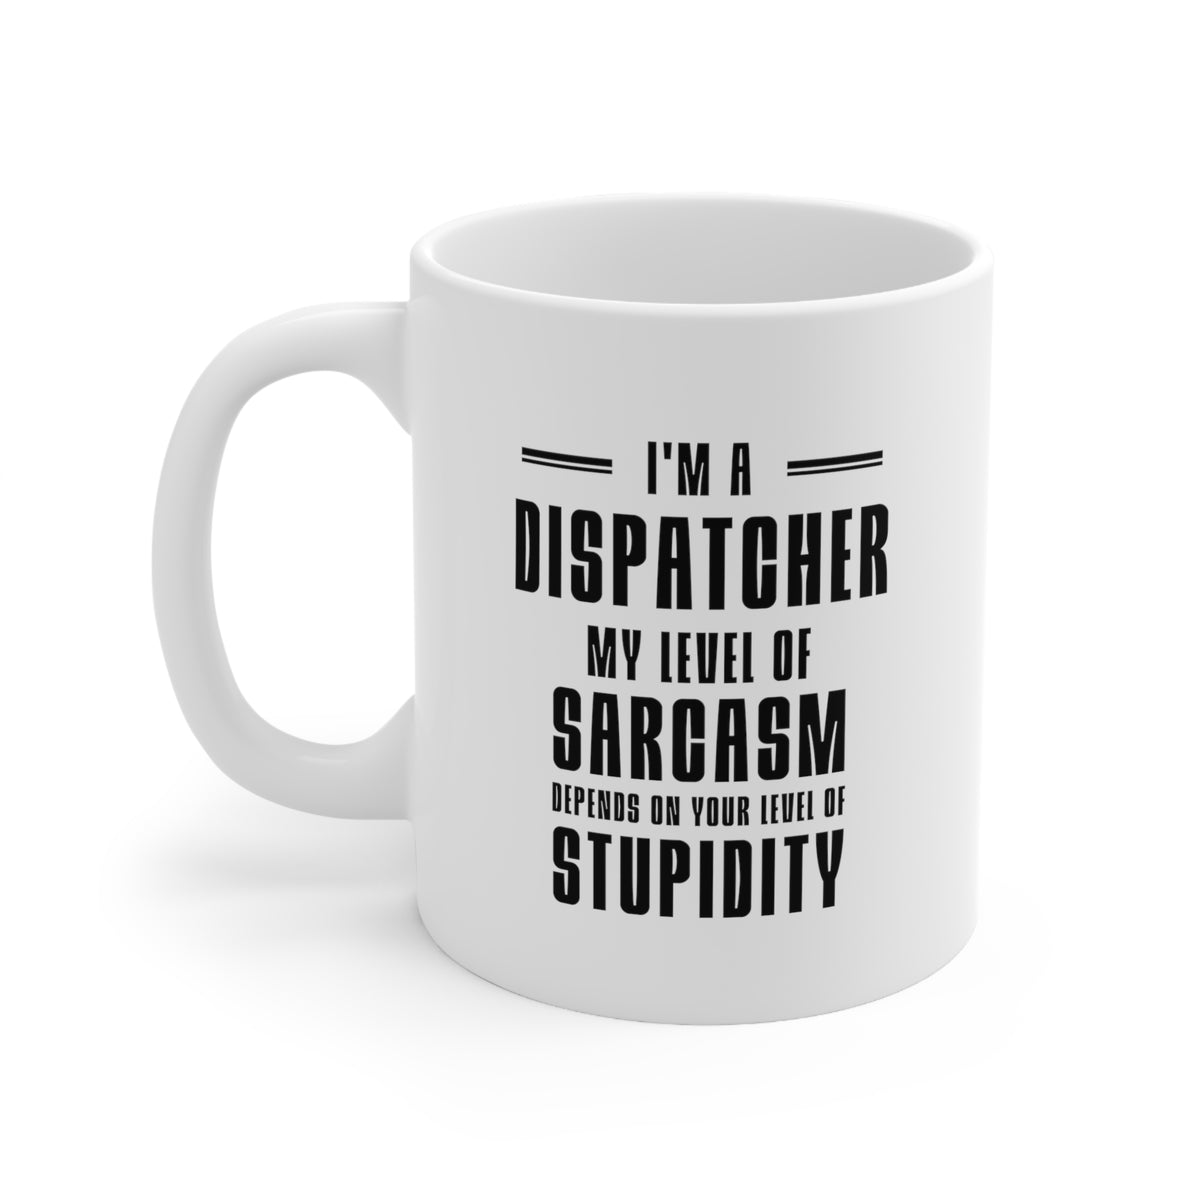 Funny Dispatcher Coffee Mug - My Level of Sarcasm Depends on Your Level of Stupidity - Unique Gifts For Dispatcher Coworkers Colleagues